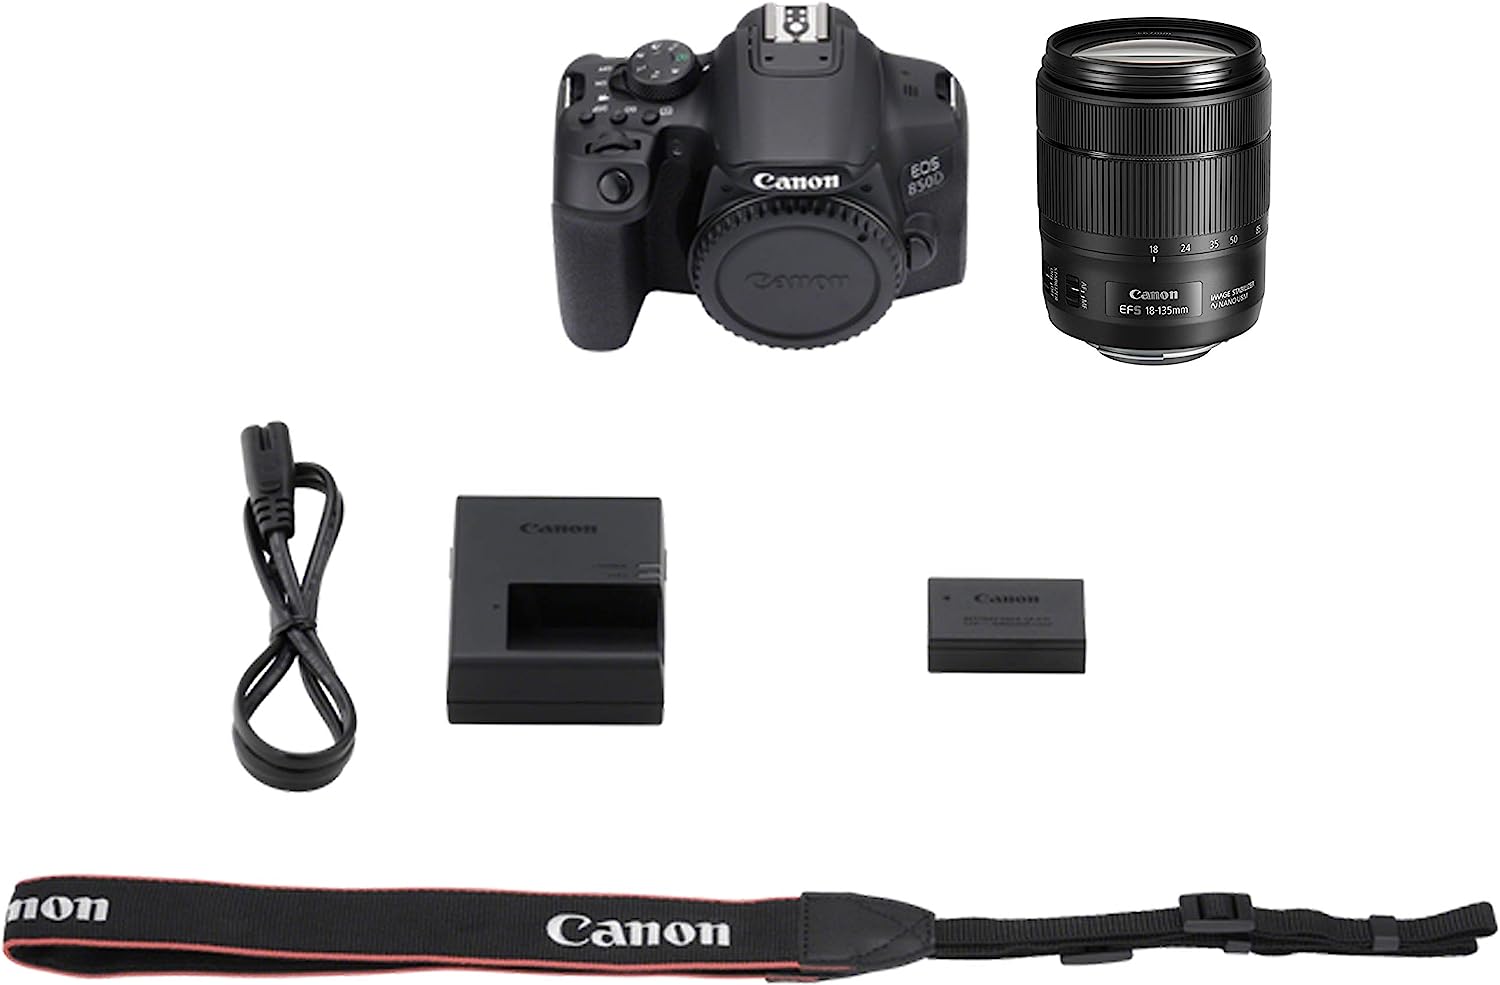 Canon EOS 850D and EF-S 18-135mm f/3.5-5.6 IS USM Lens (International Model)